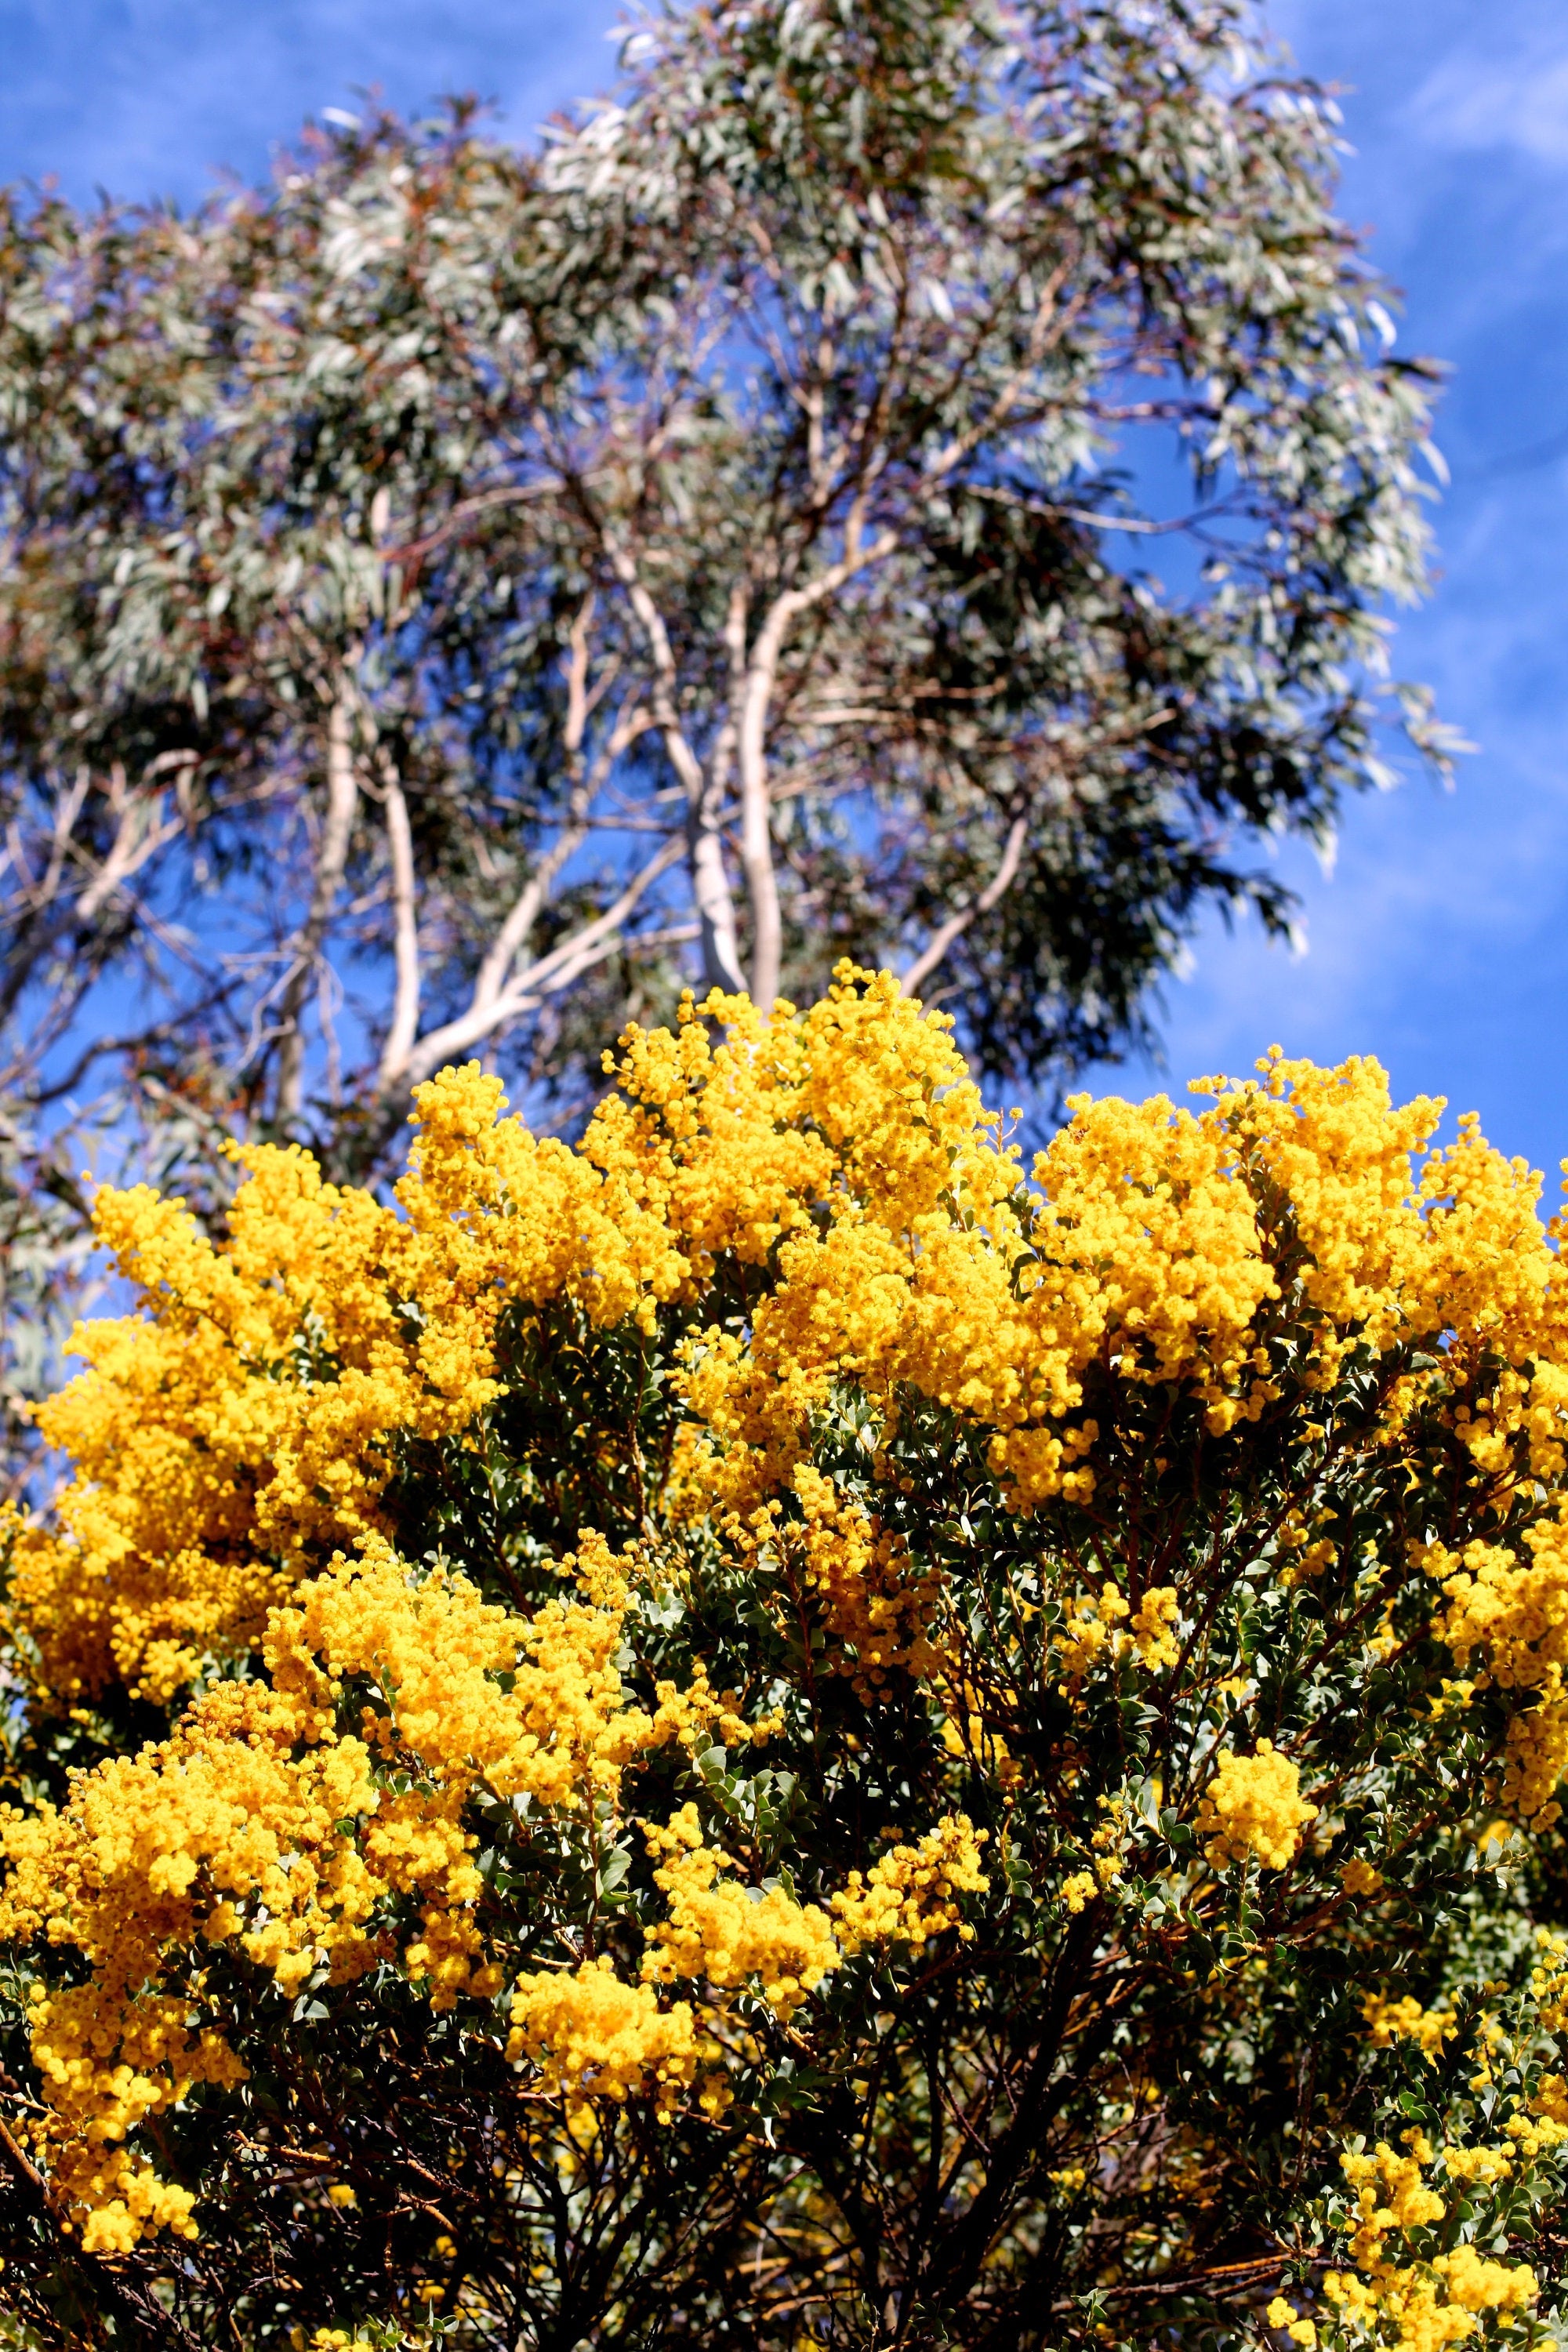 On Mt Ainslie • Golden Wattle • Set of Two Canberra Fine Photography Prints